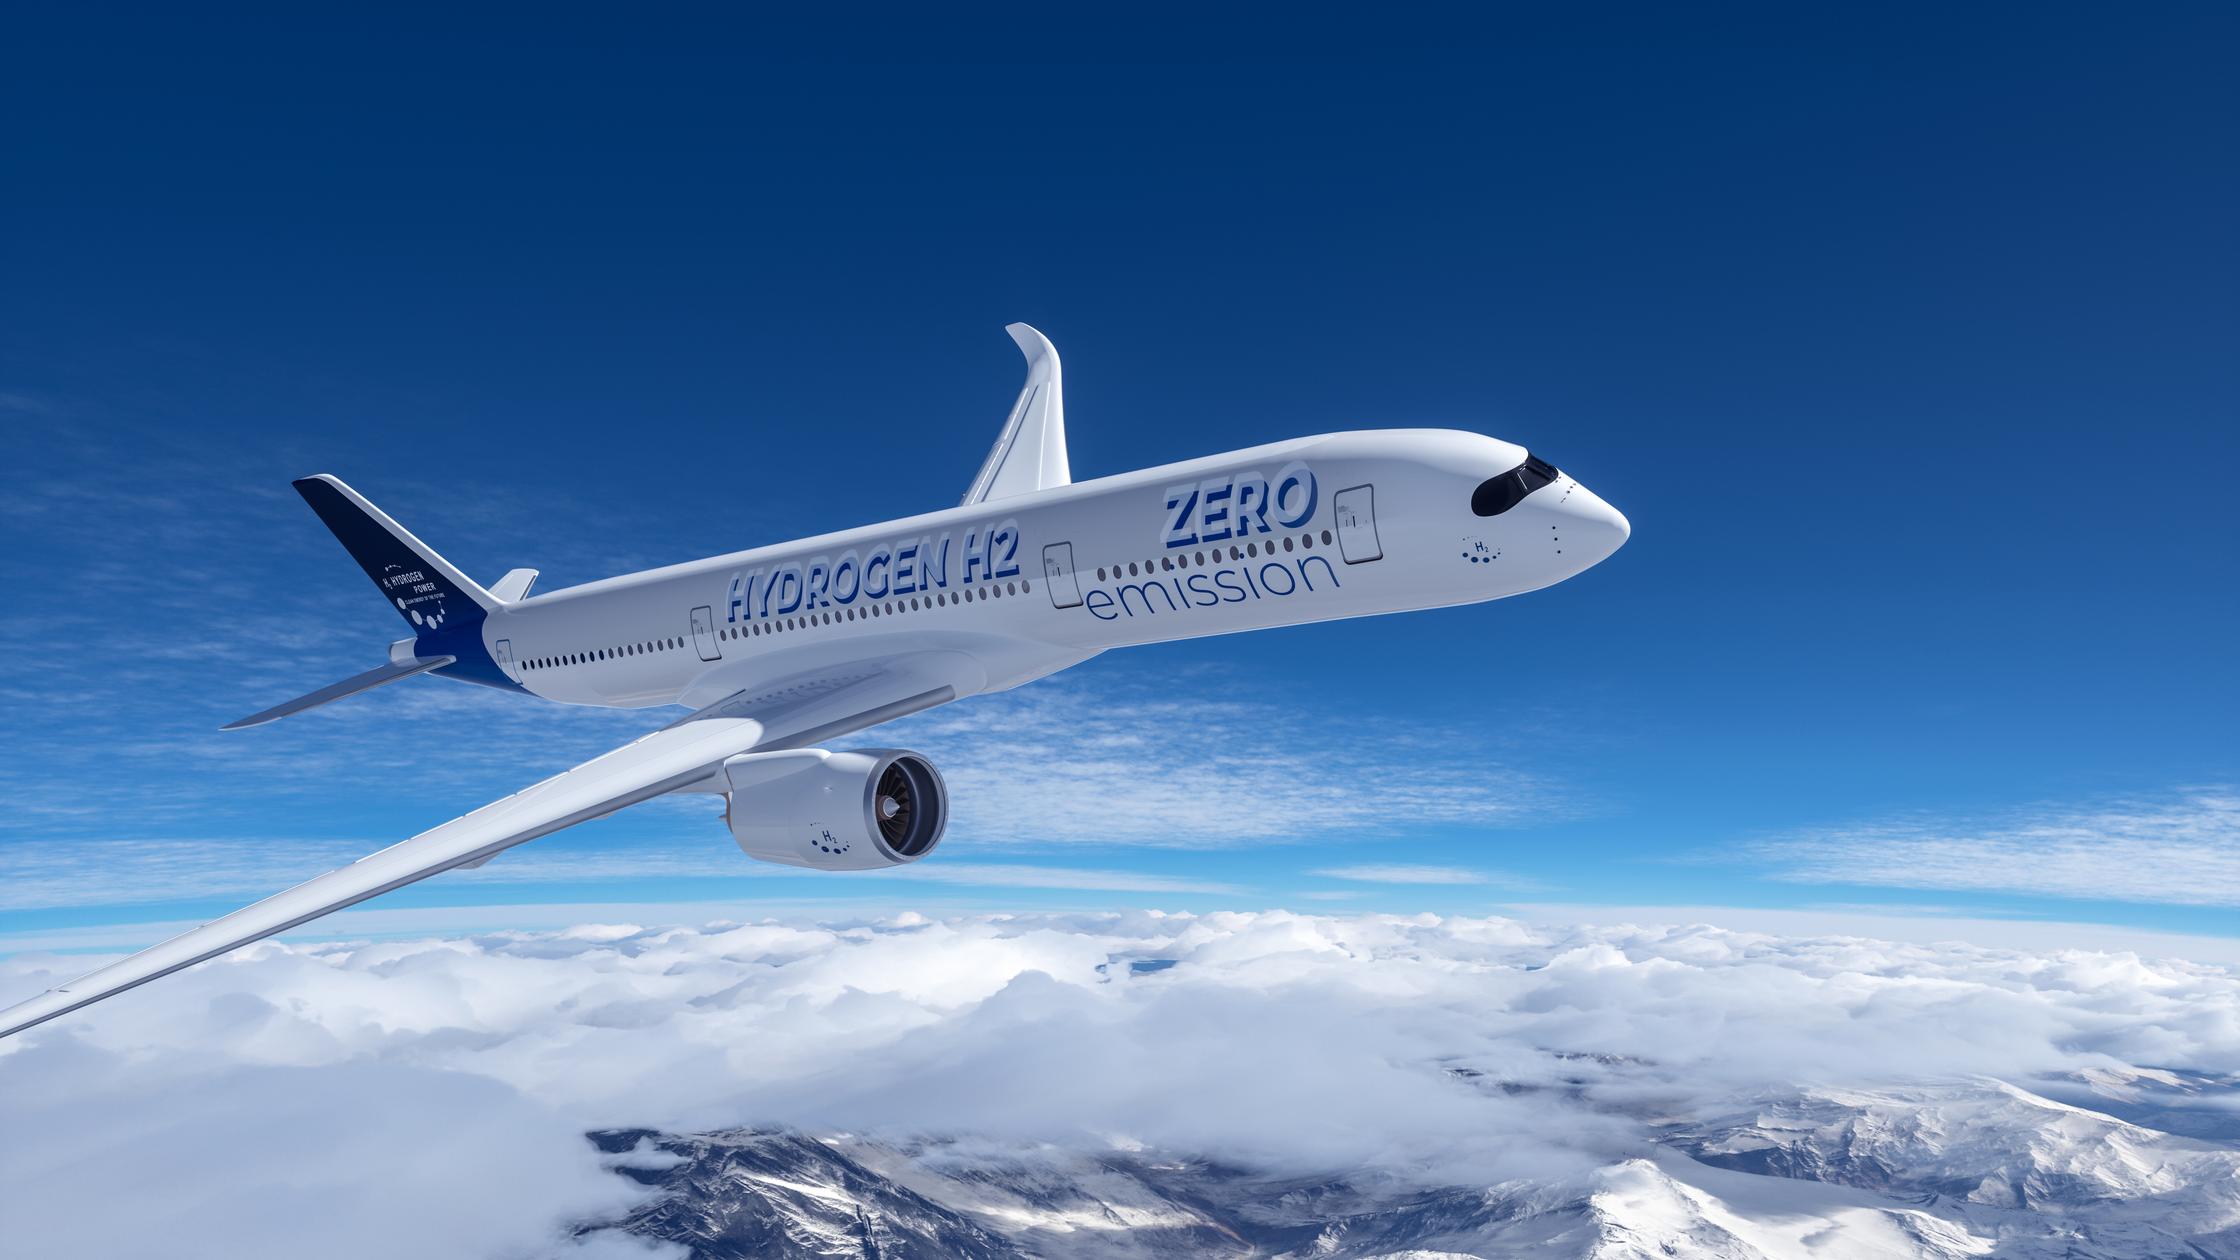 Making the future if flight - Blue Hydrogen filled H2 Aeroplane flying in the sky